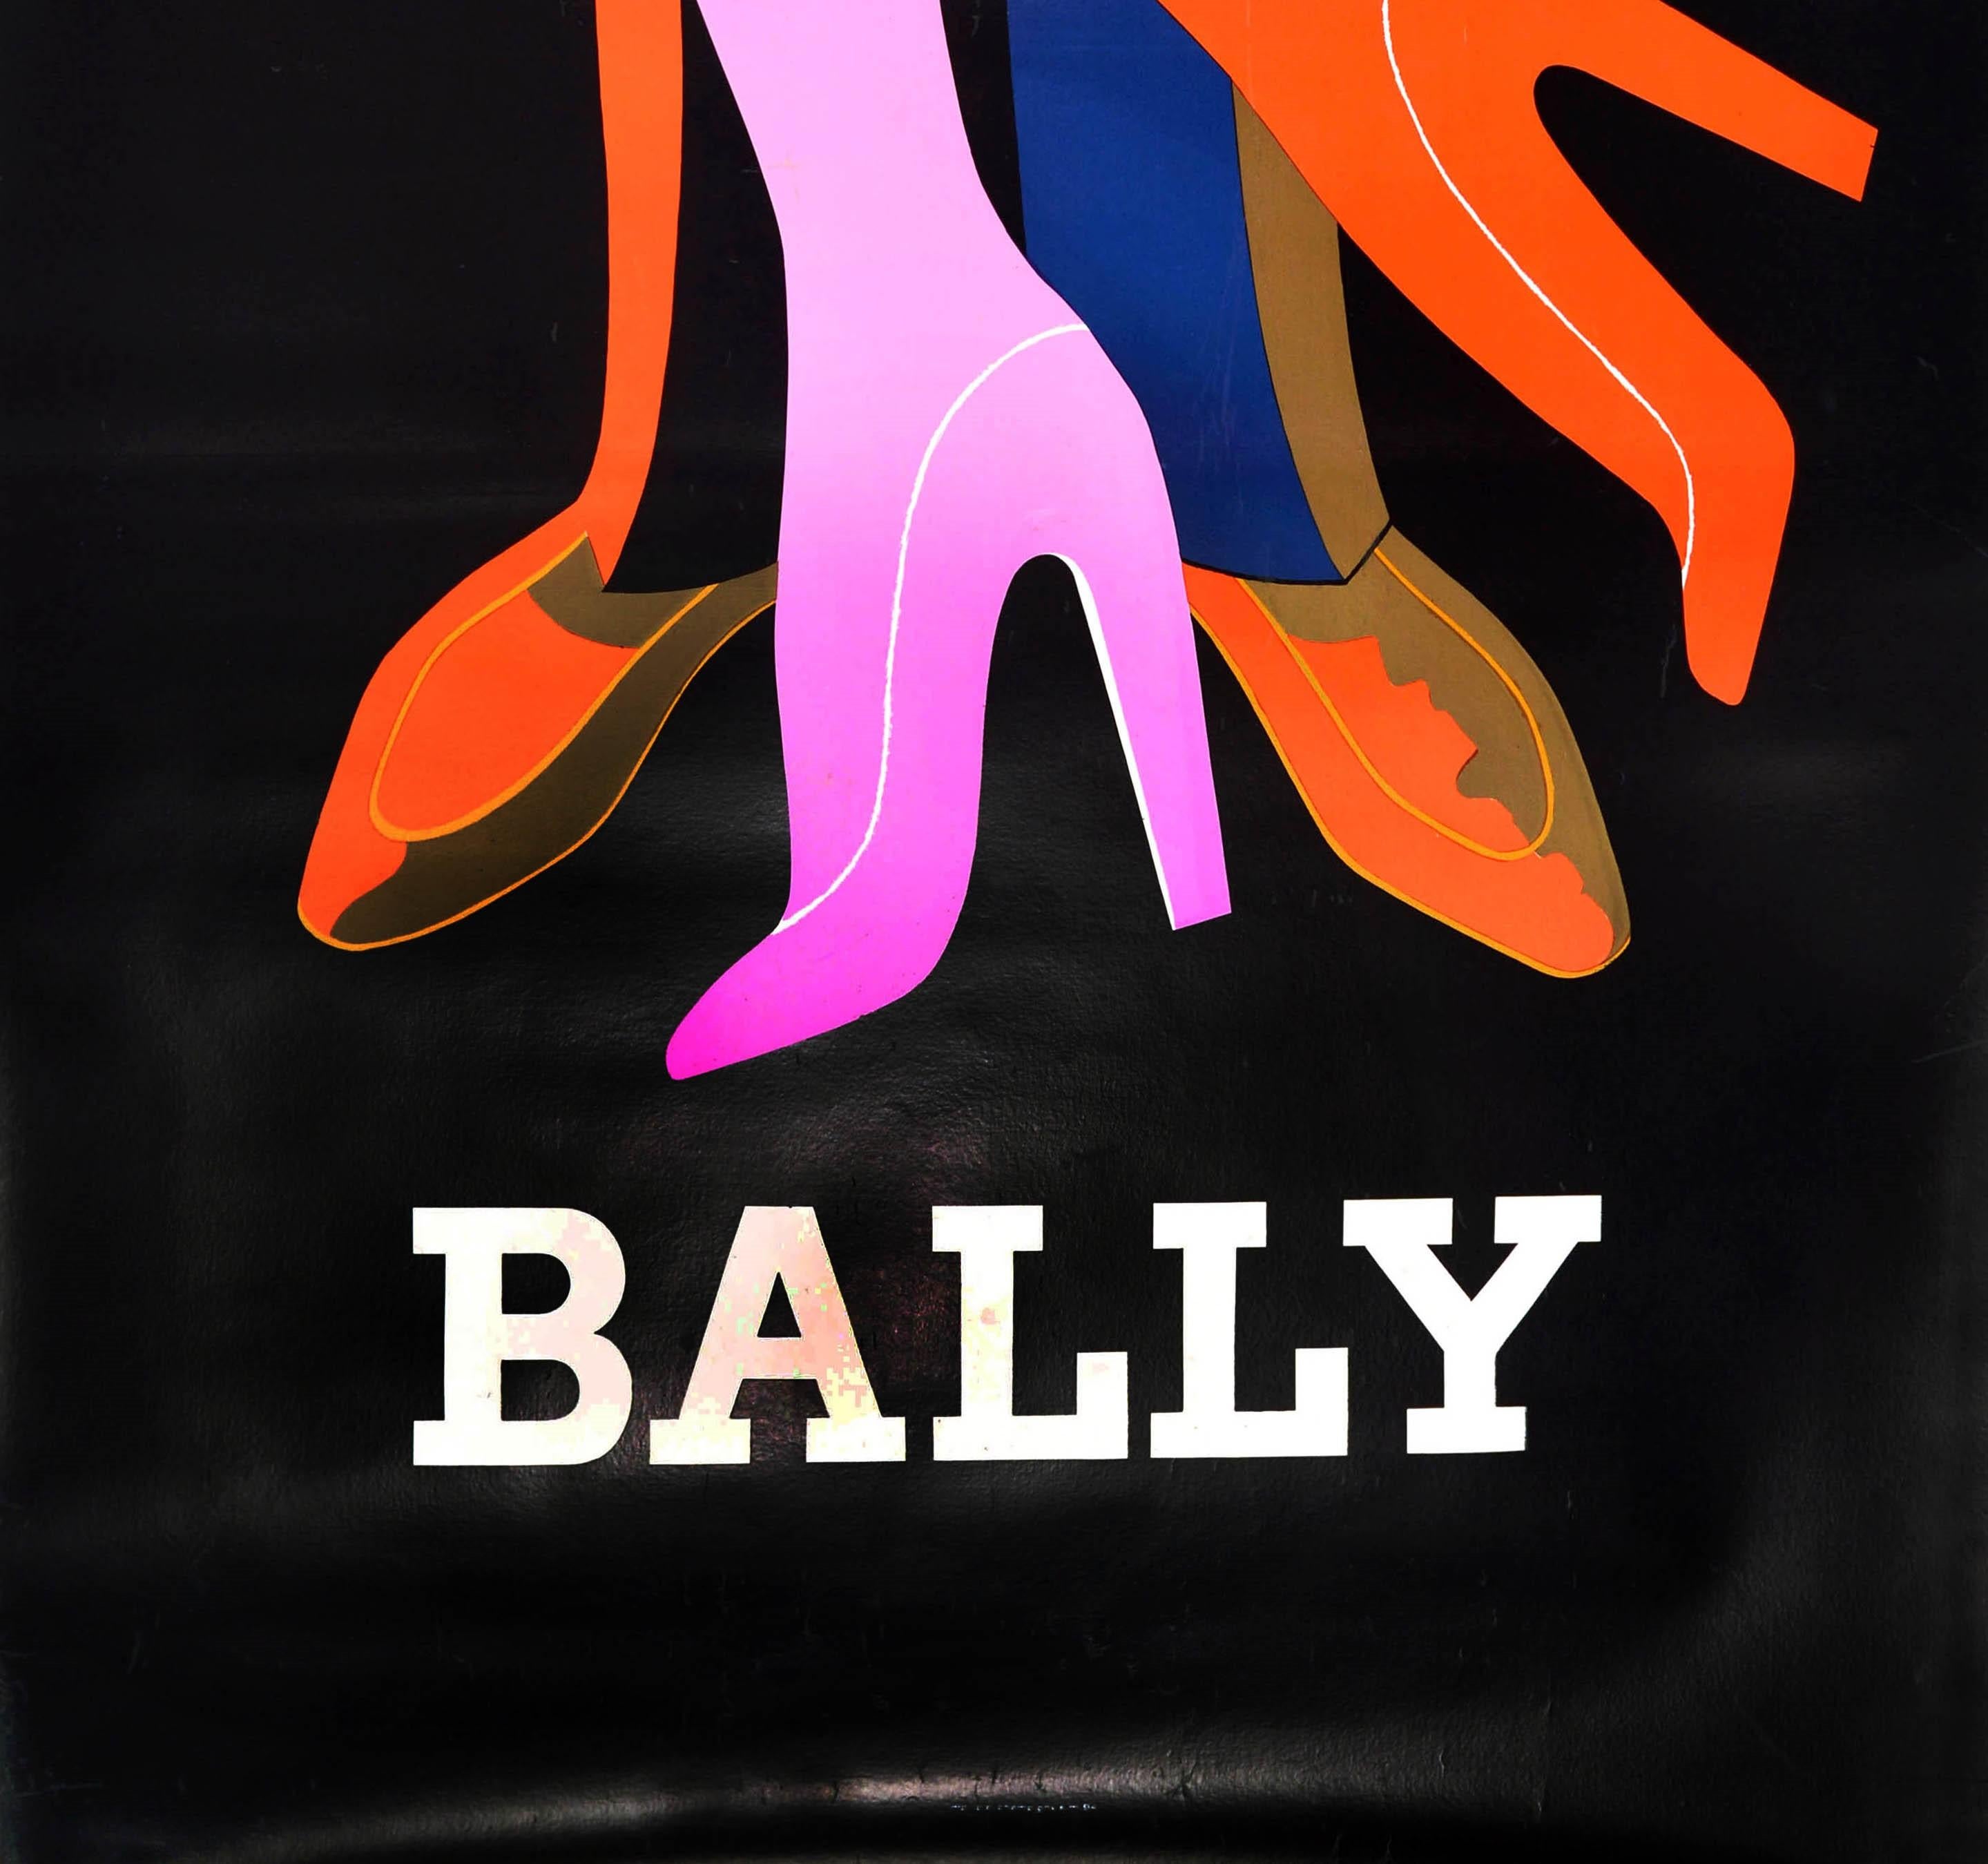 old school bally shoes